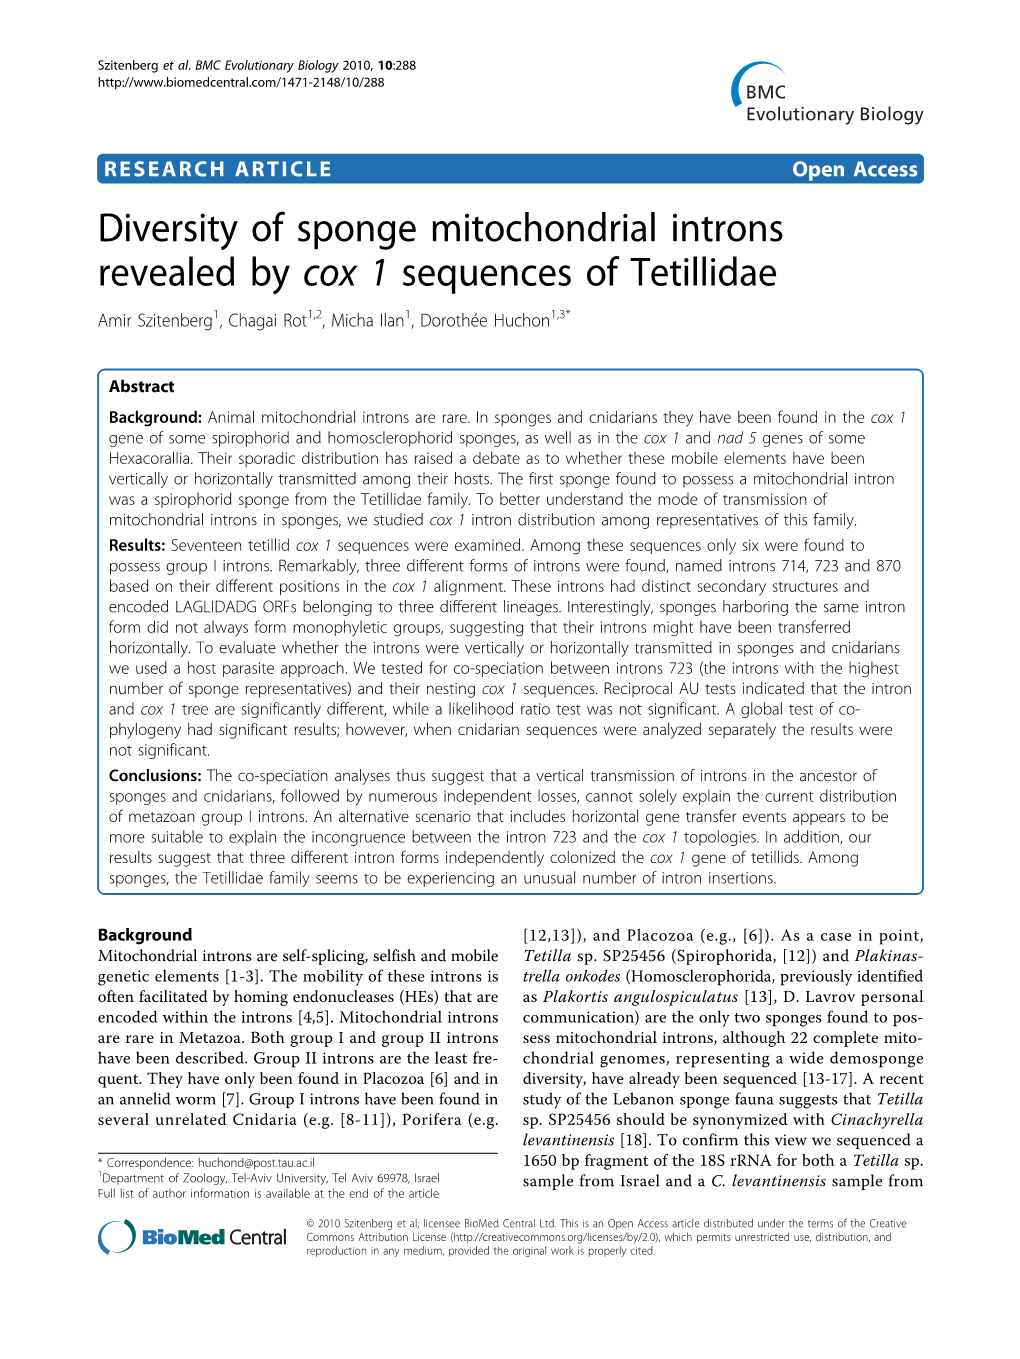 Diversity of Sponge Mitochondrial Introns Revealed by Cox 1 Sequences of Tetillidae Amir Szitenberg1, Chagai Rot1,2, Micha Ilan1, Dorothée Huchon1,3*